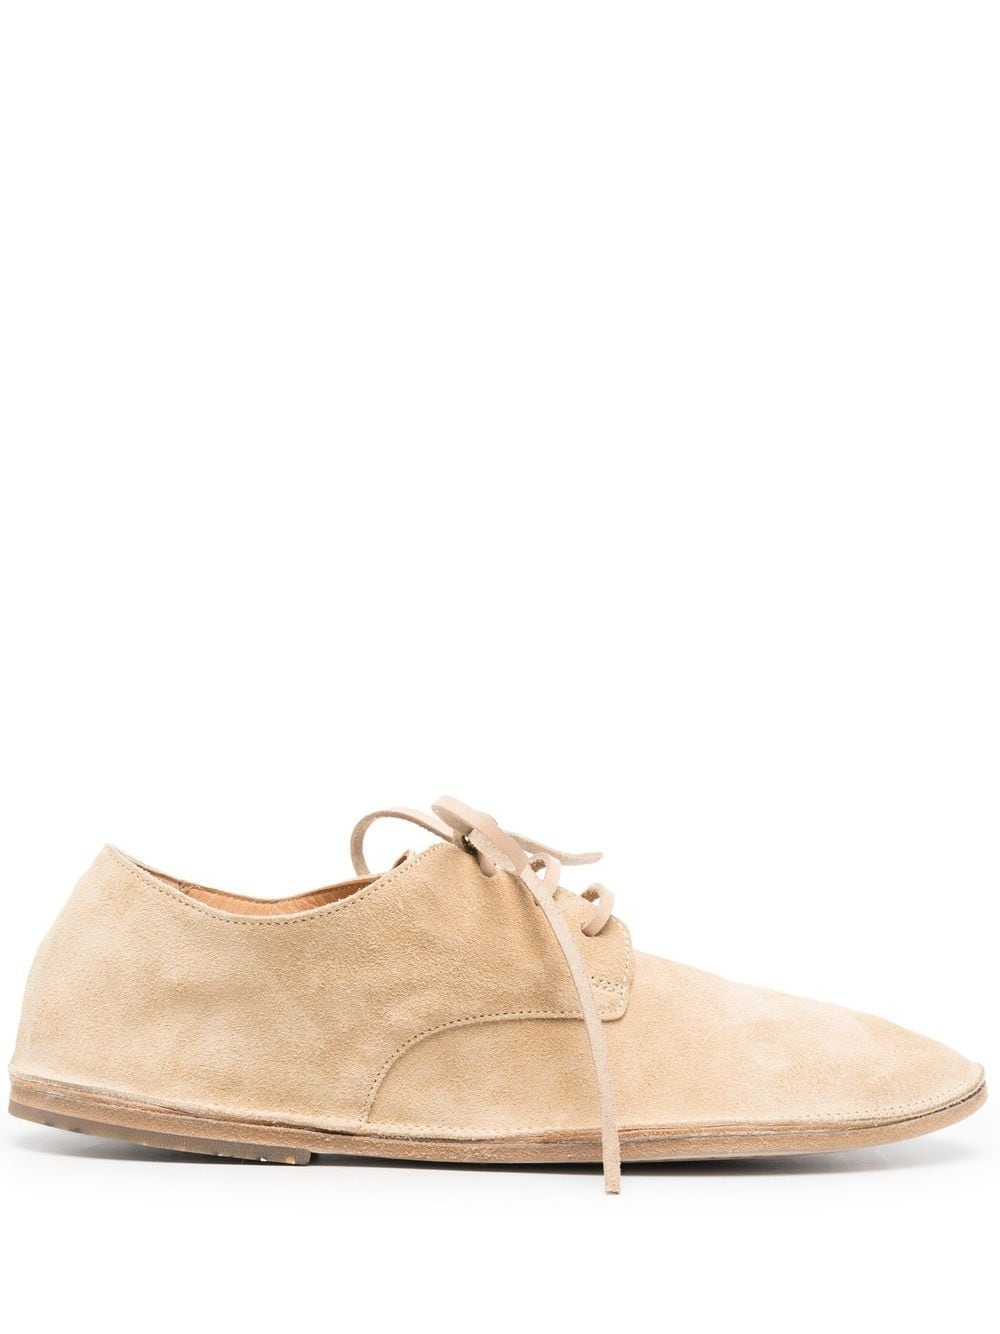 Marsèll Lace-up Suede Shoes In Nude